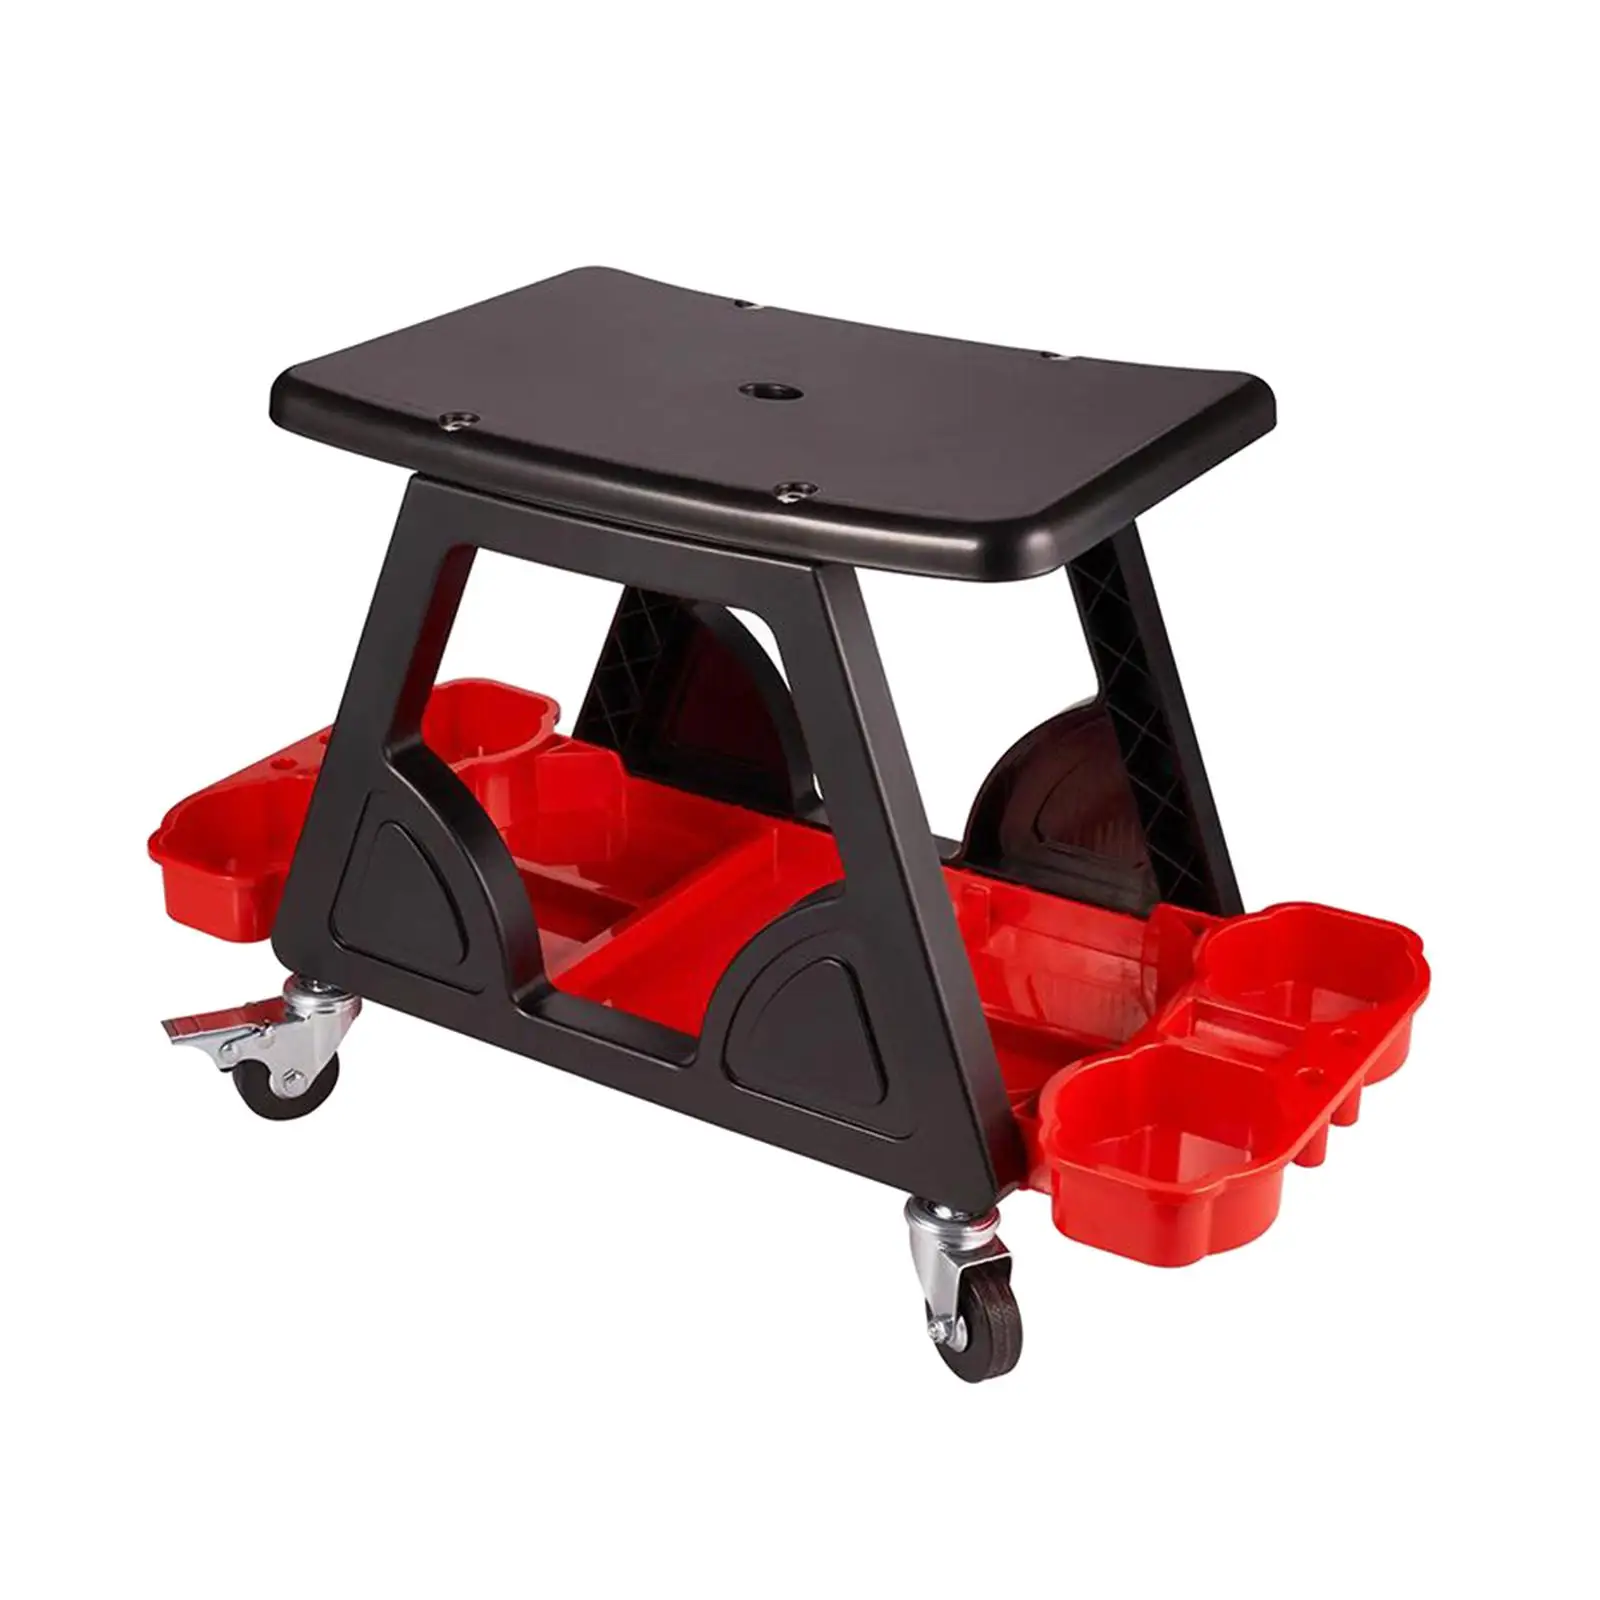 Garage Stool Creeper Vehicle Accessories Car Cleaning Mechanic Creeper Seat images - 6